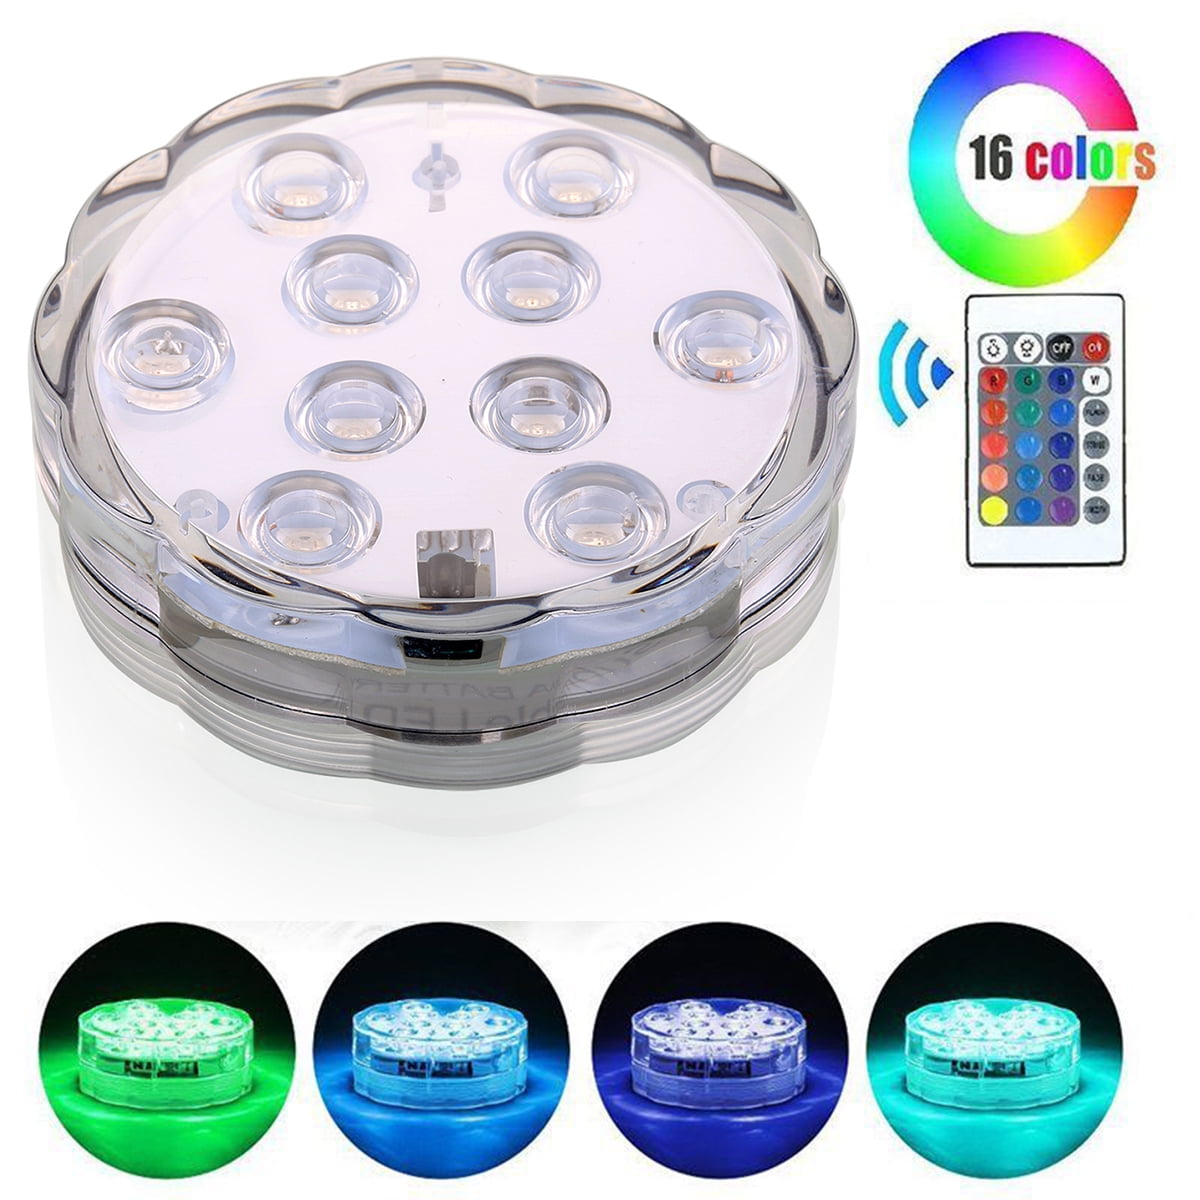 Details about   16PC Swimming Pool Light RGB LED Bulb Remote Control Underwater Submersible Vase 